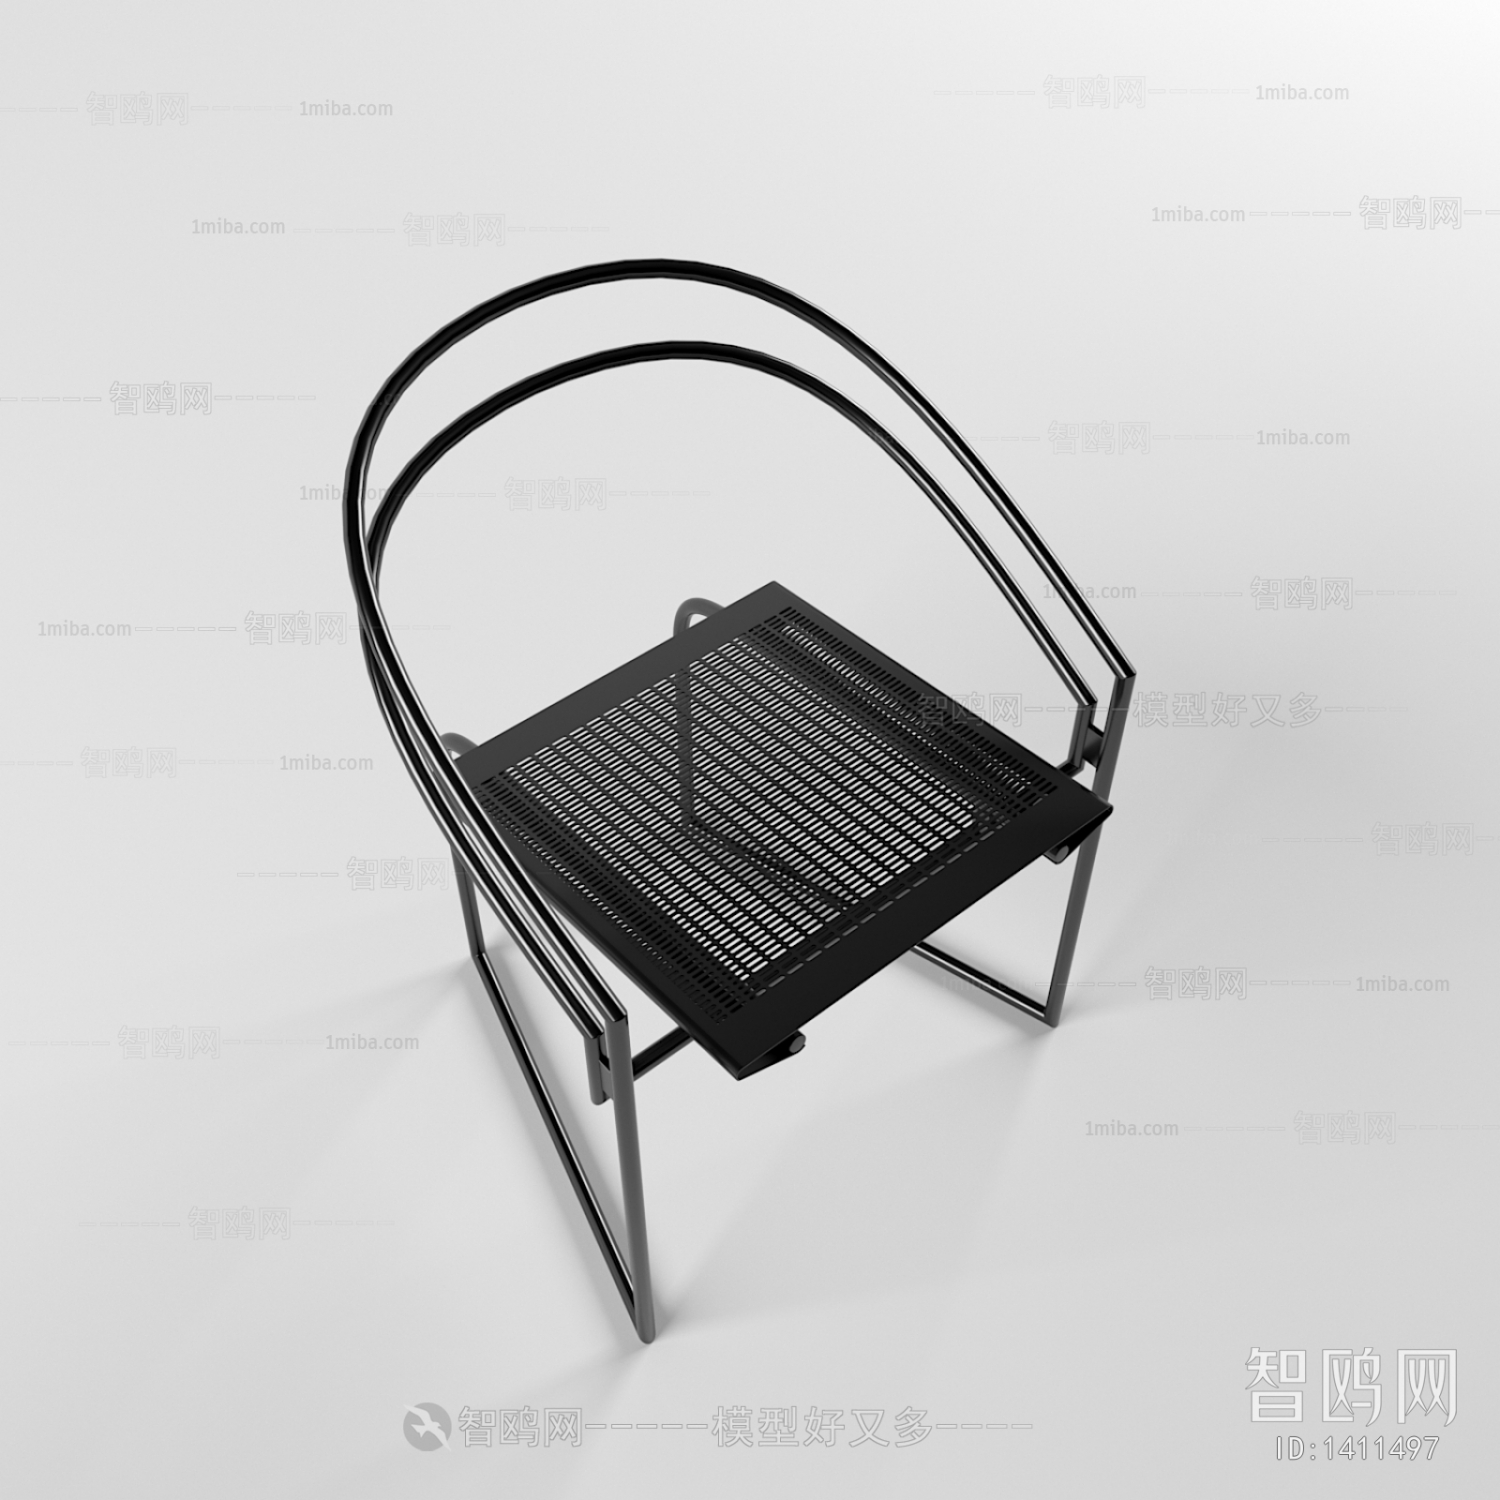 Modern Industrial Style Lounge Chair